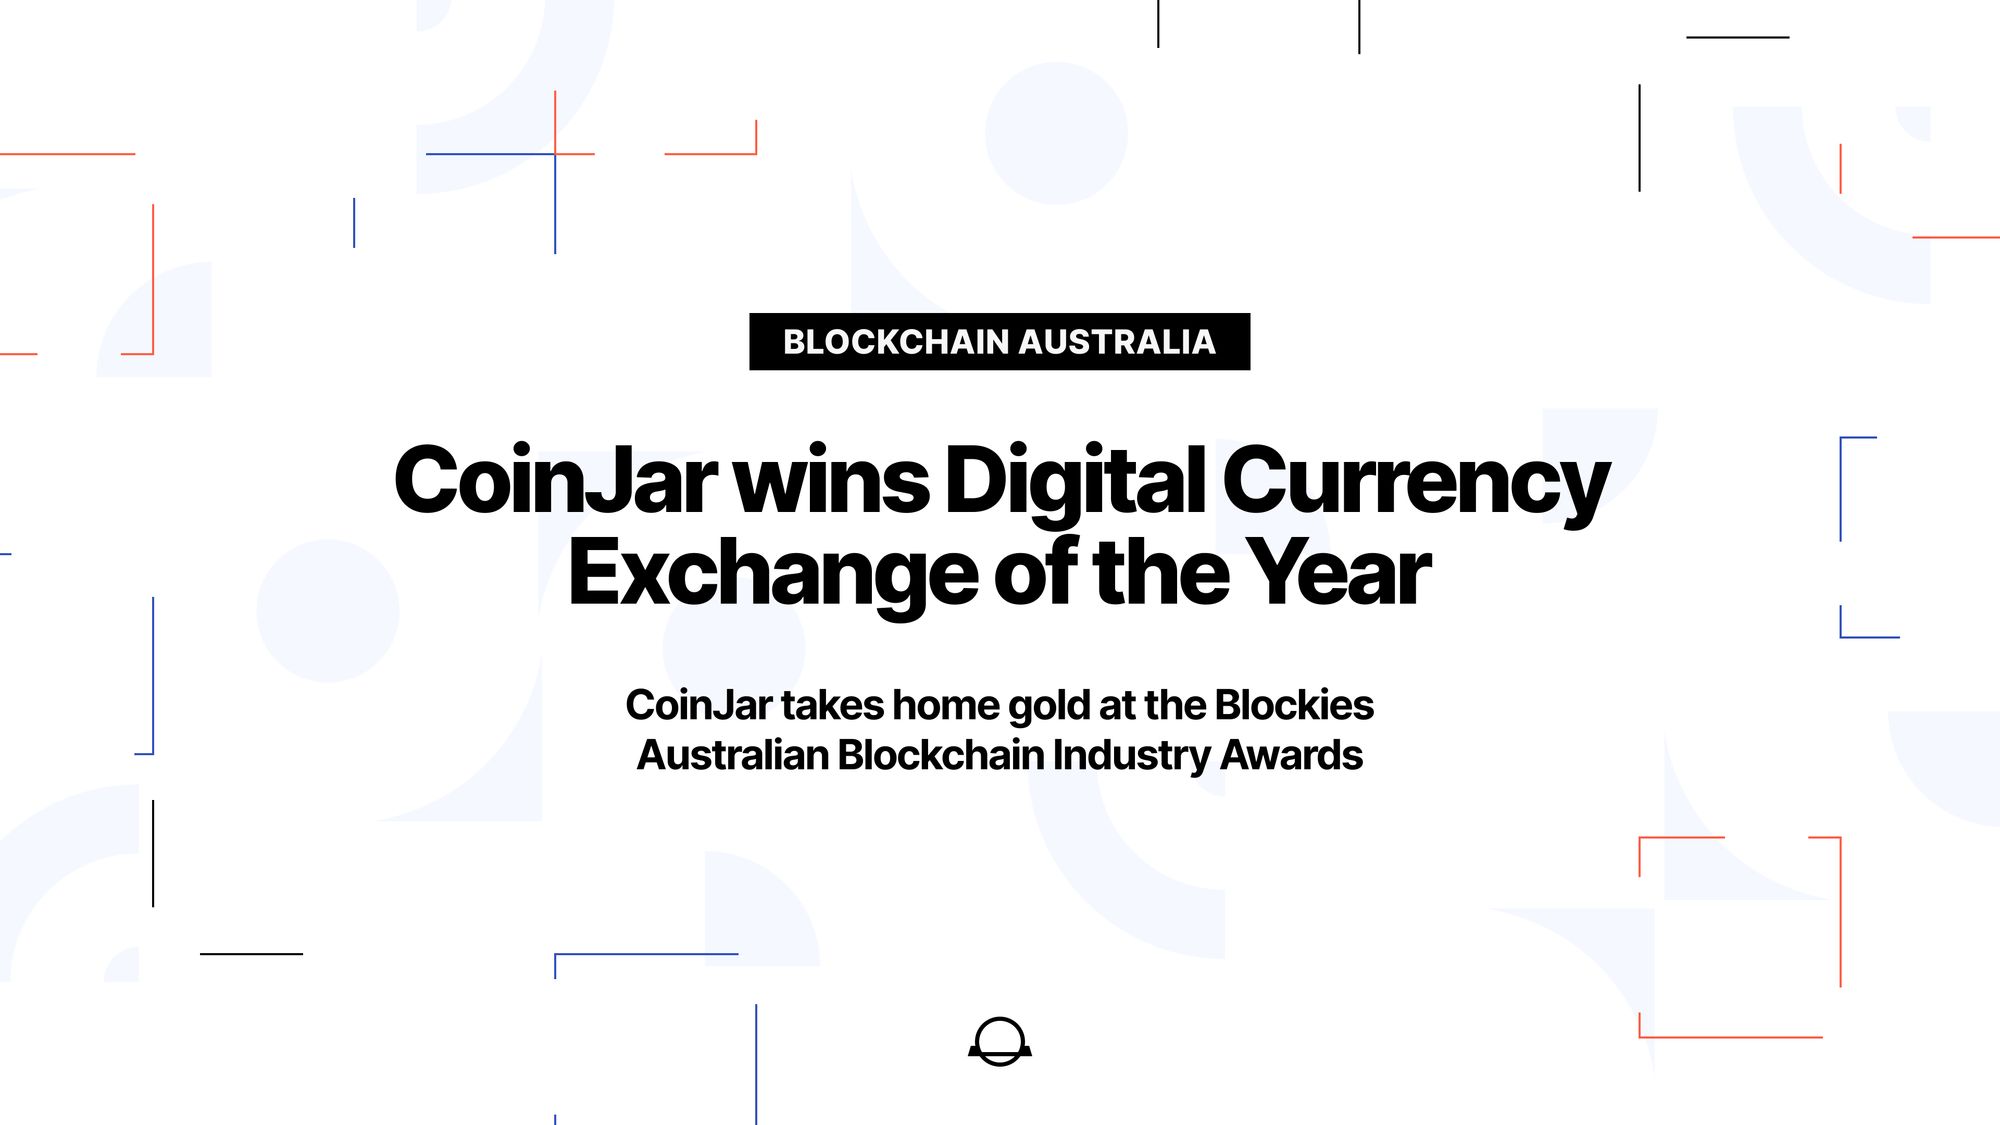 CoinJar won the 2023 Digital Currency Exchange of the Year Award at The Blockies presented by Blockchain Australia